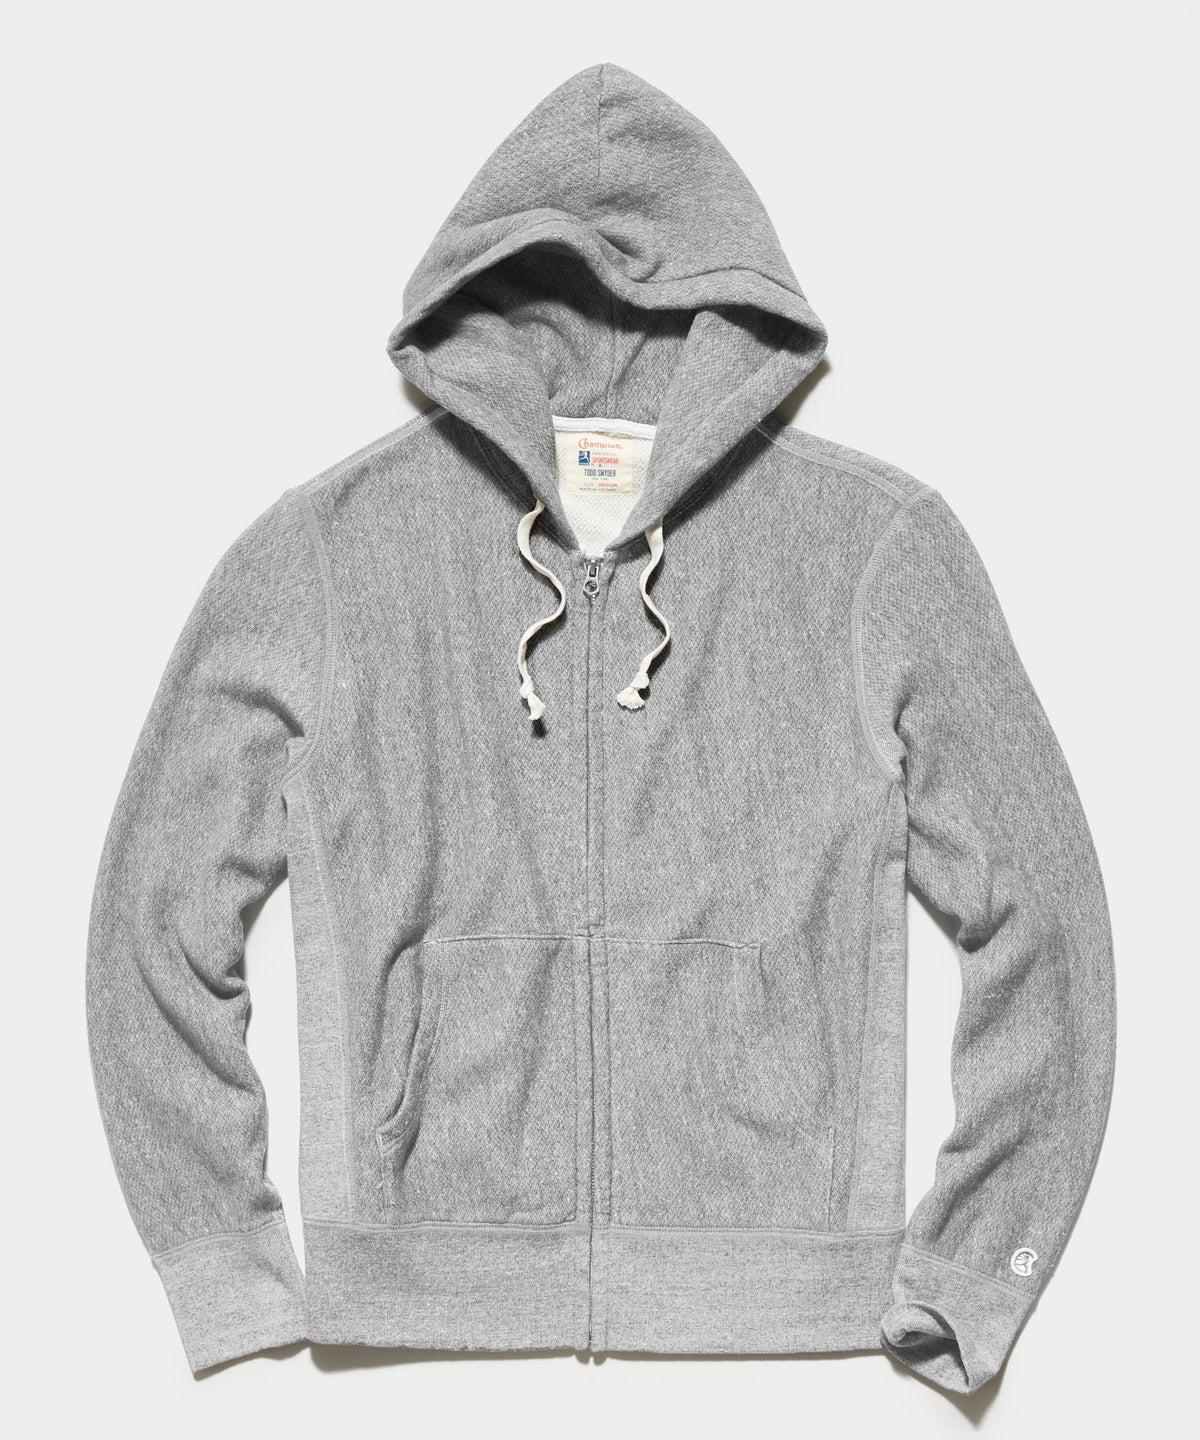 Champion Midweight Full Zip Hoodie in Antique Grey Mix